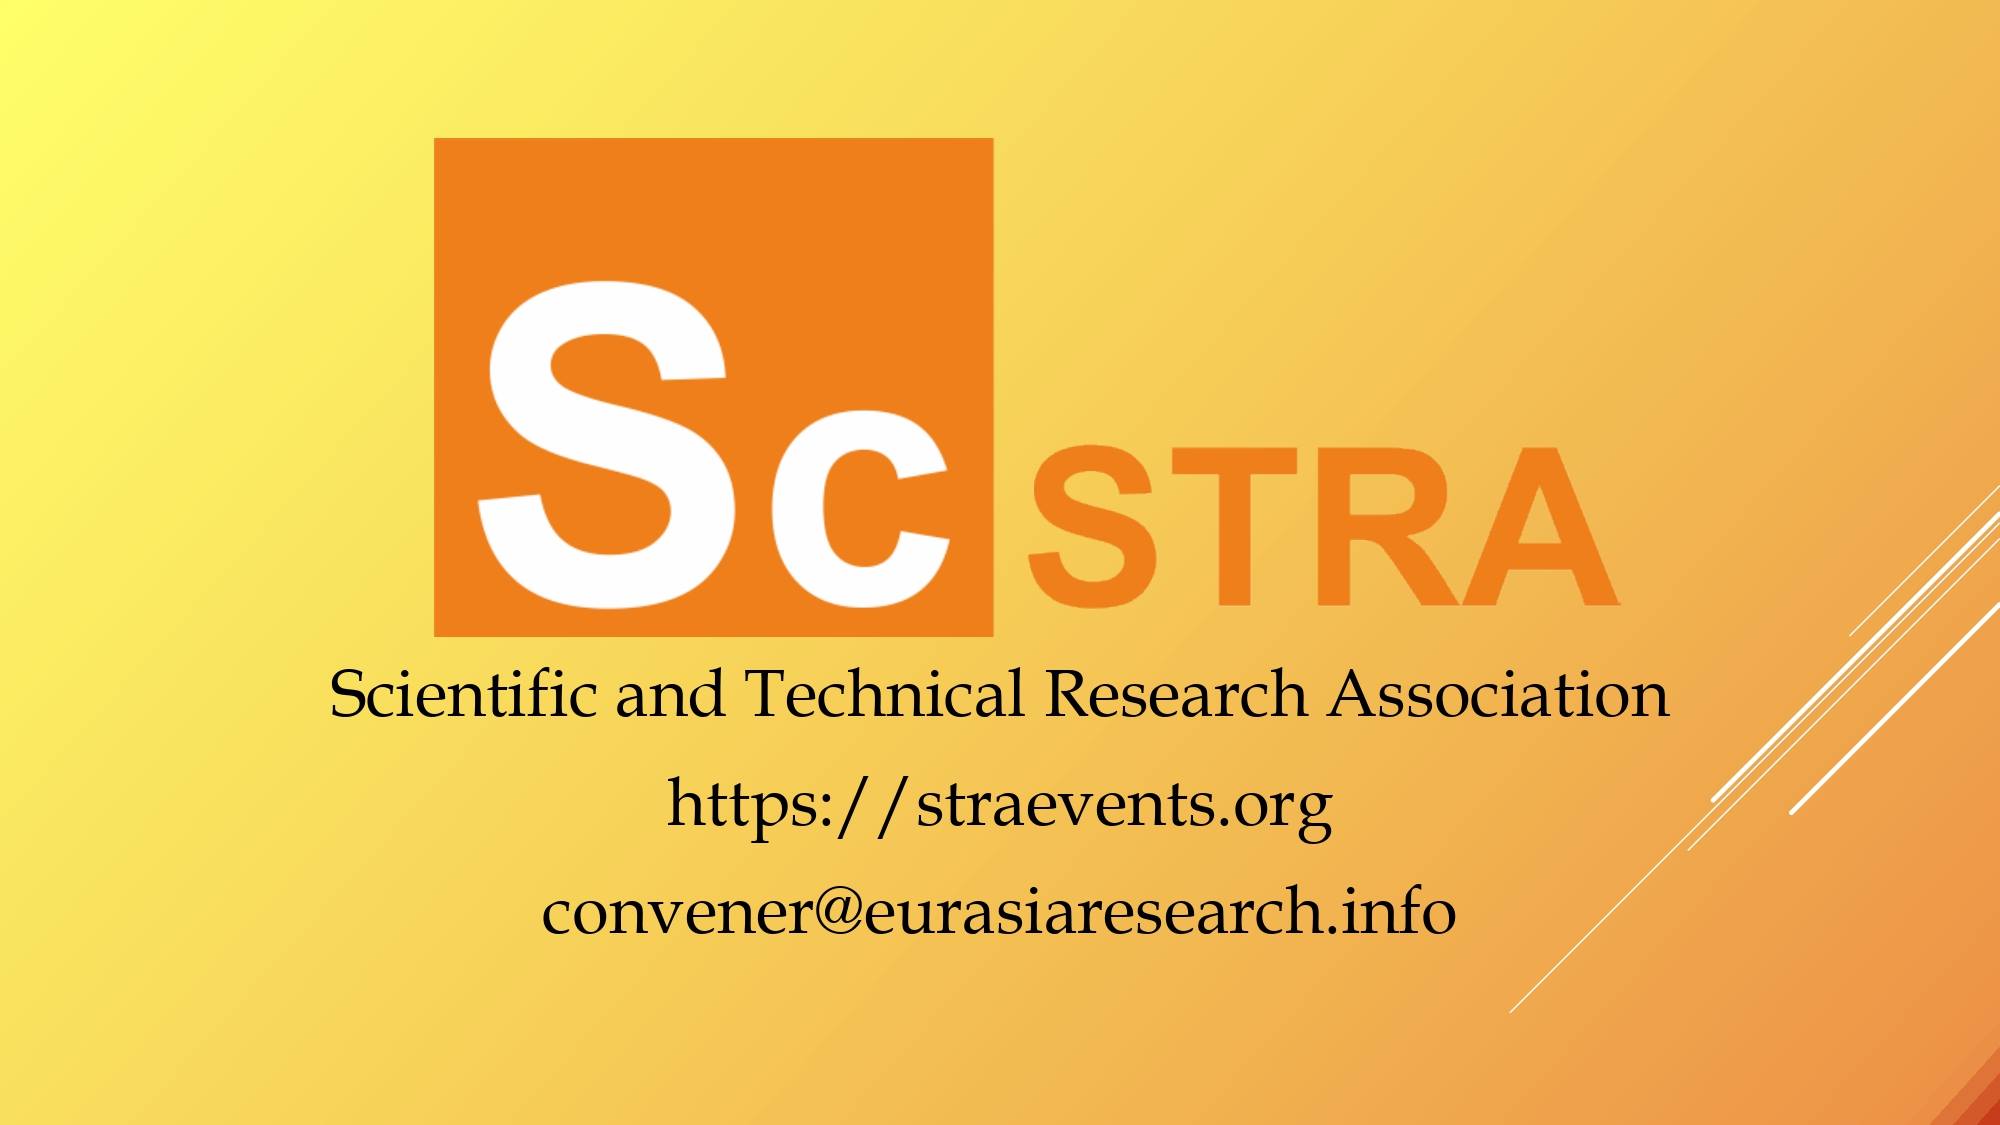 ICSTR Barcelona – International Conference on Science & Technology Research, 27-28 May 2021, Barcelona, Spain